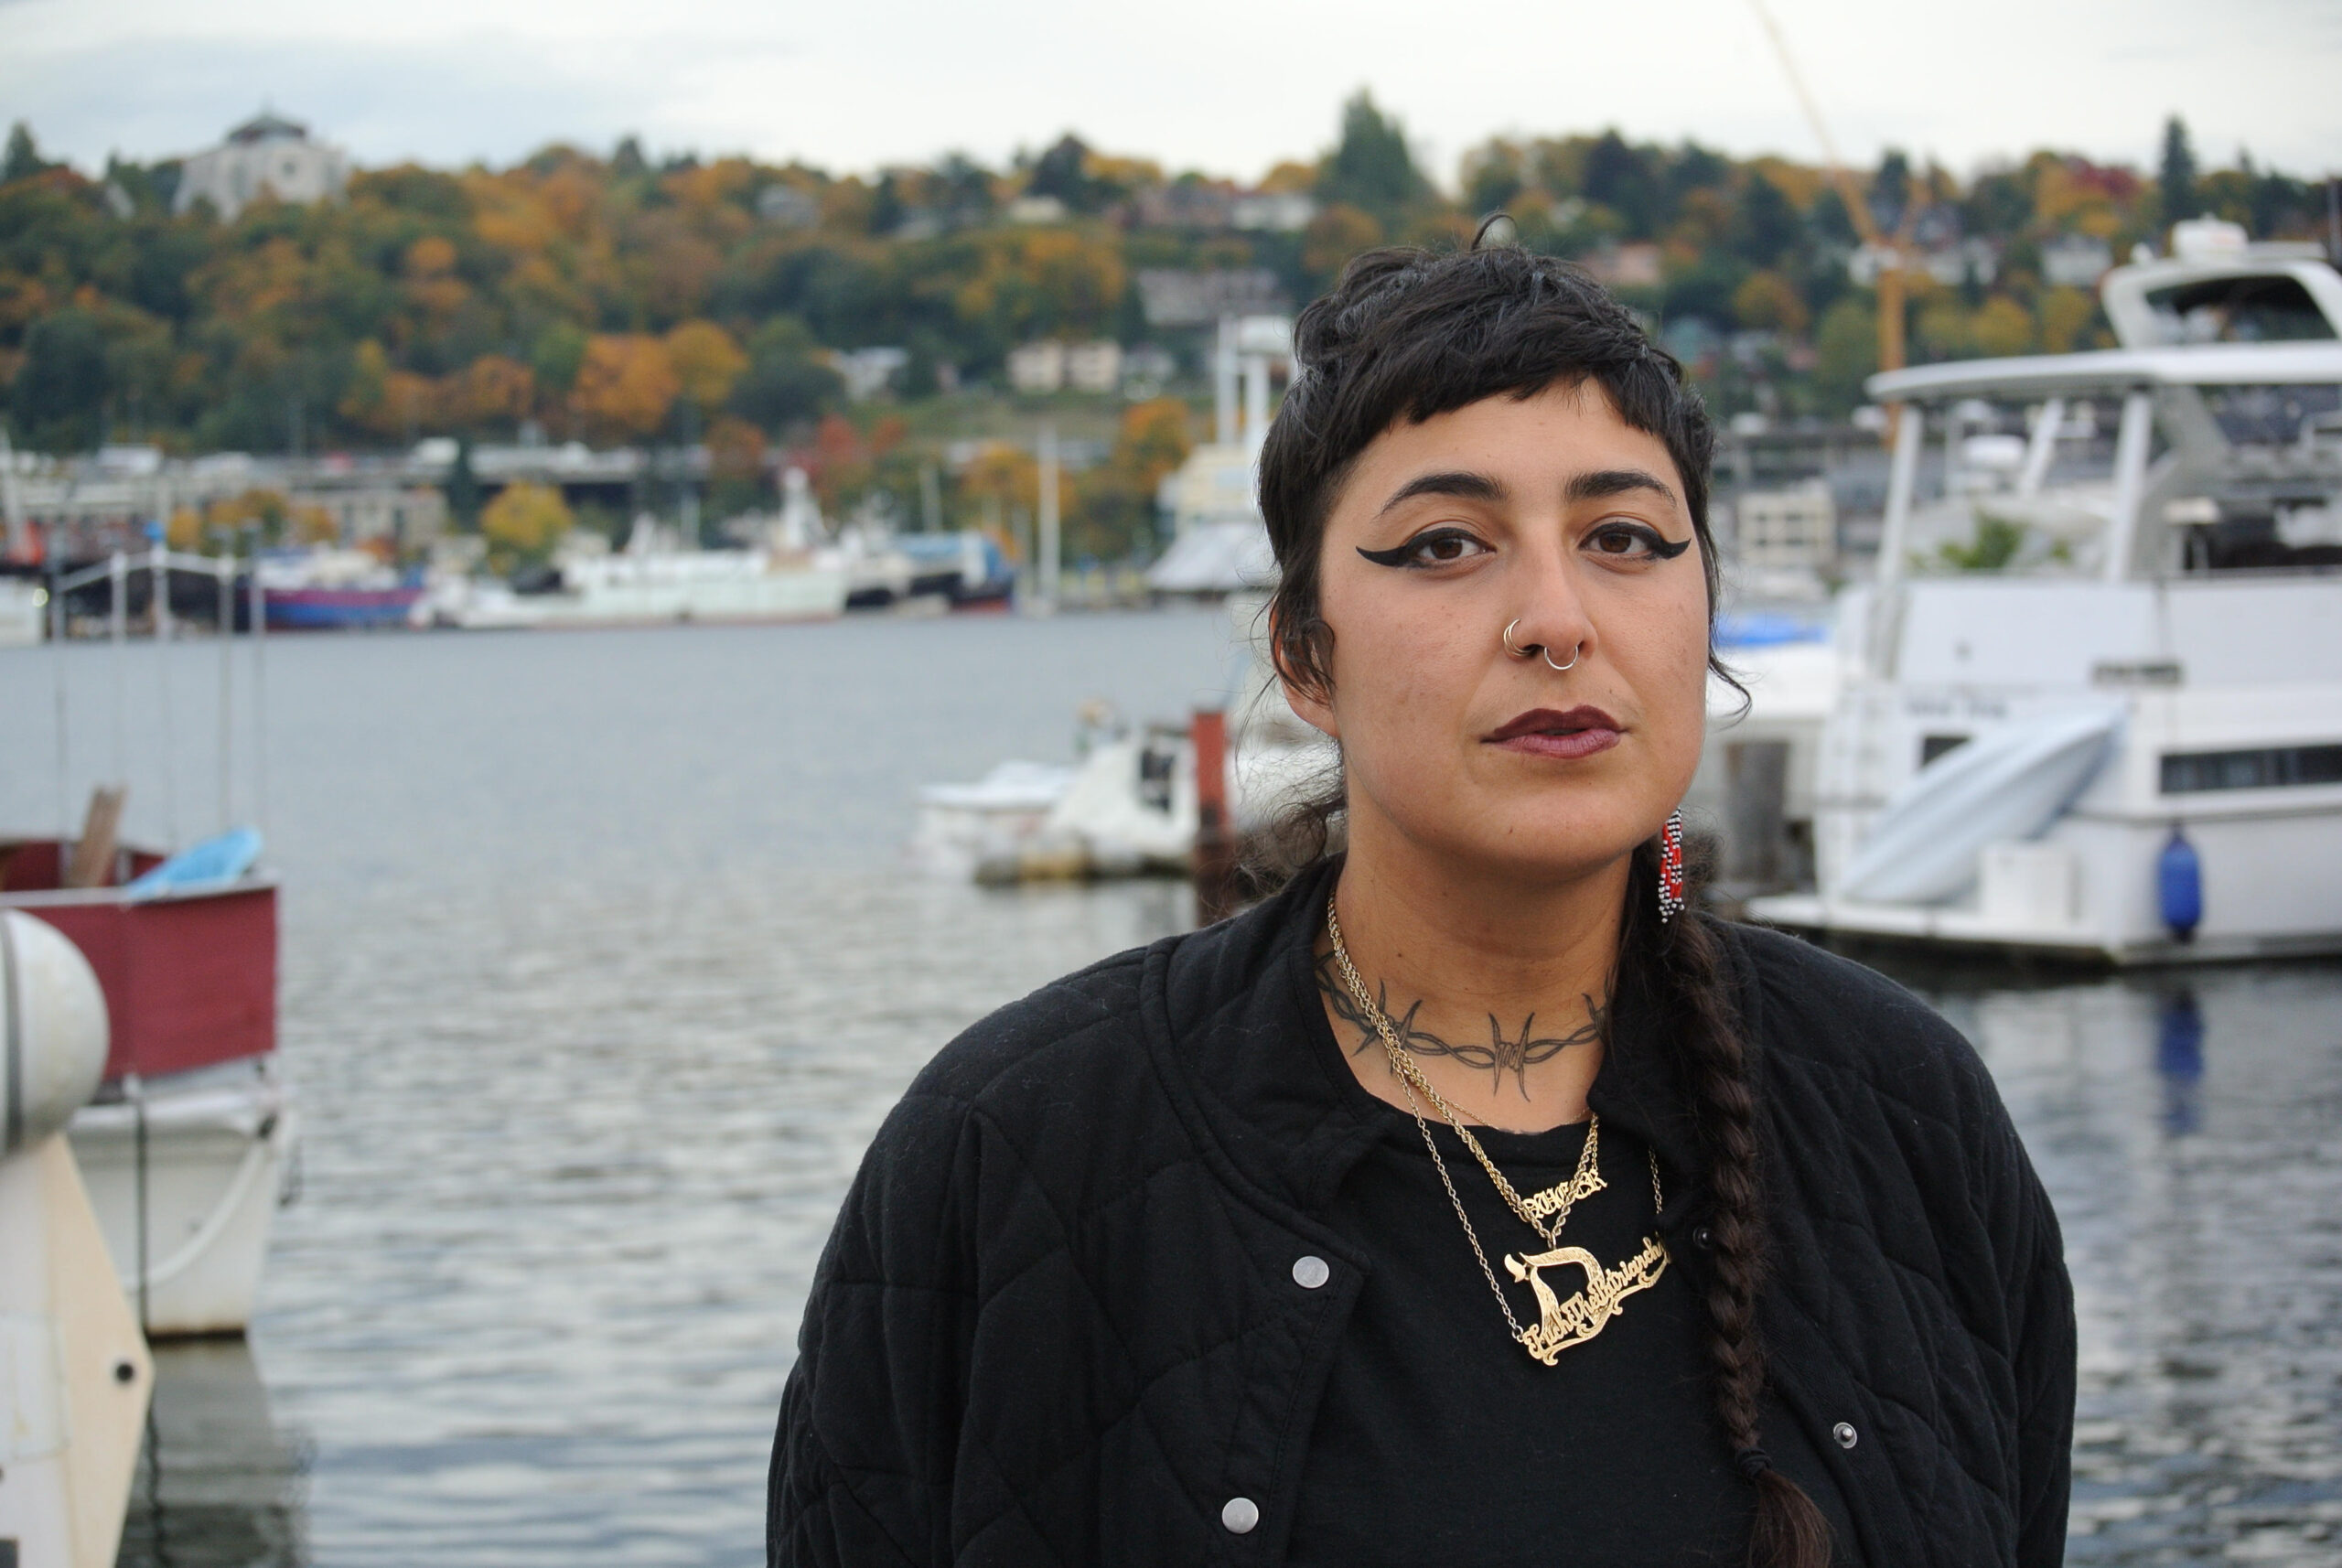 Person with dark hair and dark shirts and lots of necklaces standing in front of water and boats